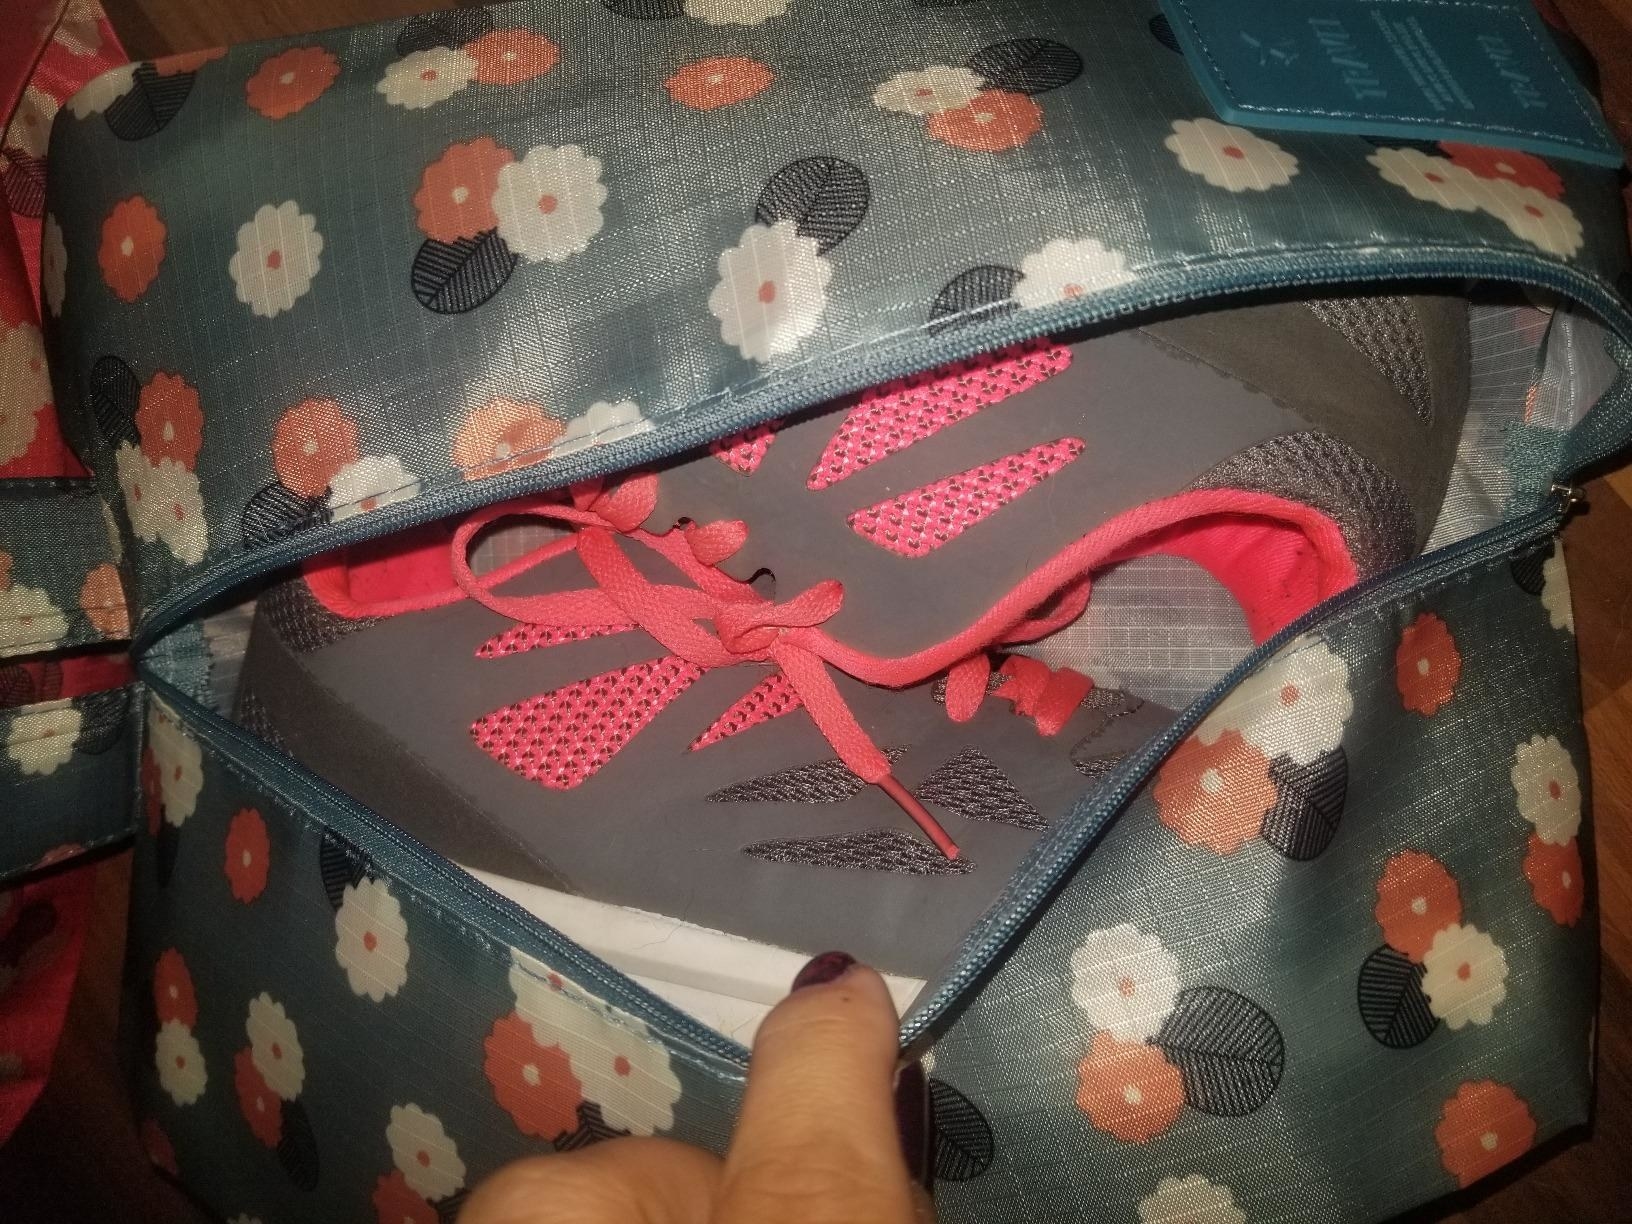 Reviewer image of sneakers in shoe bag